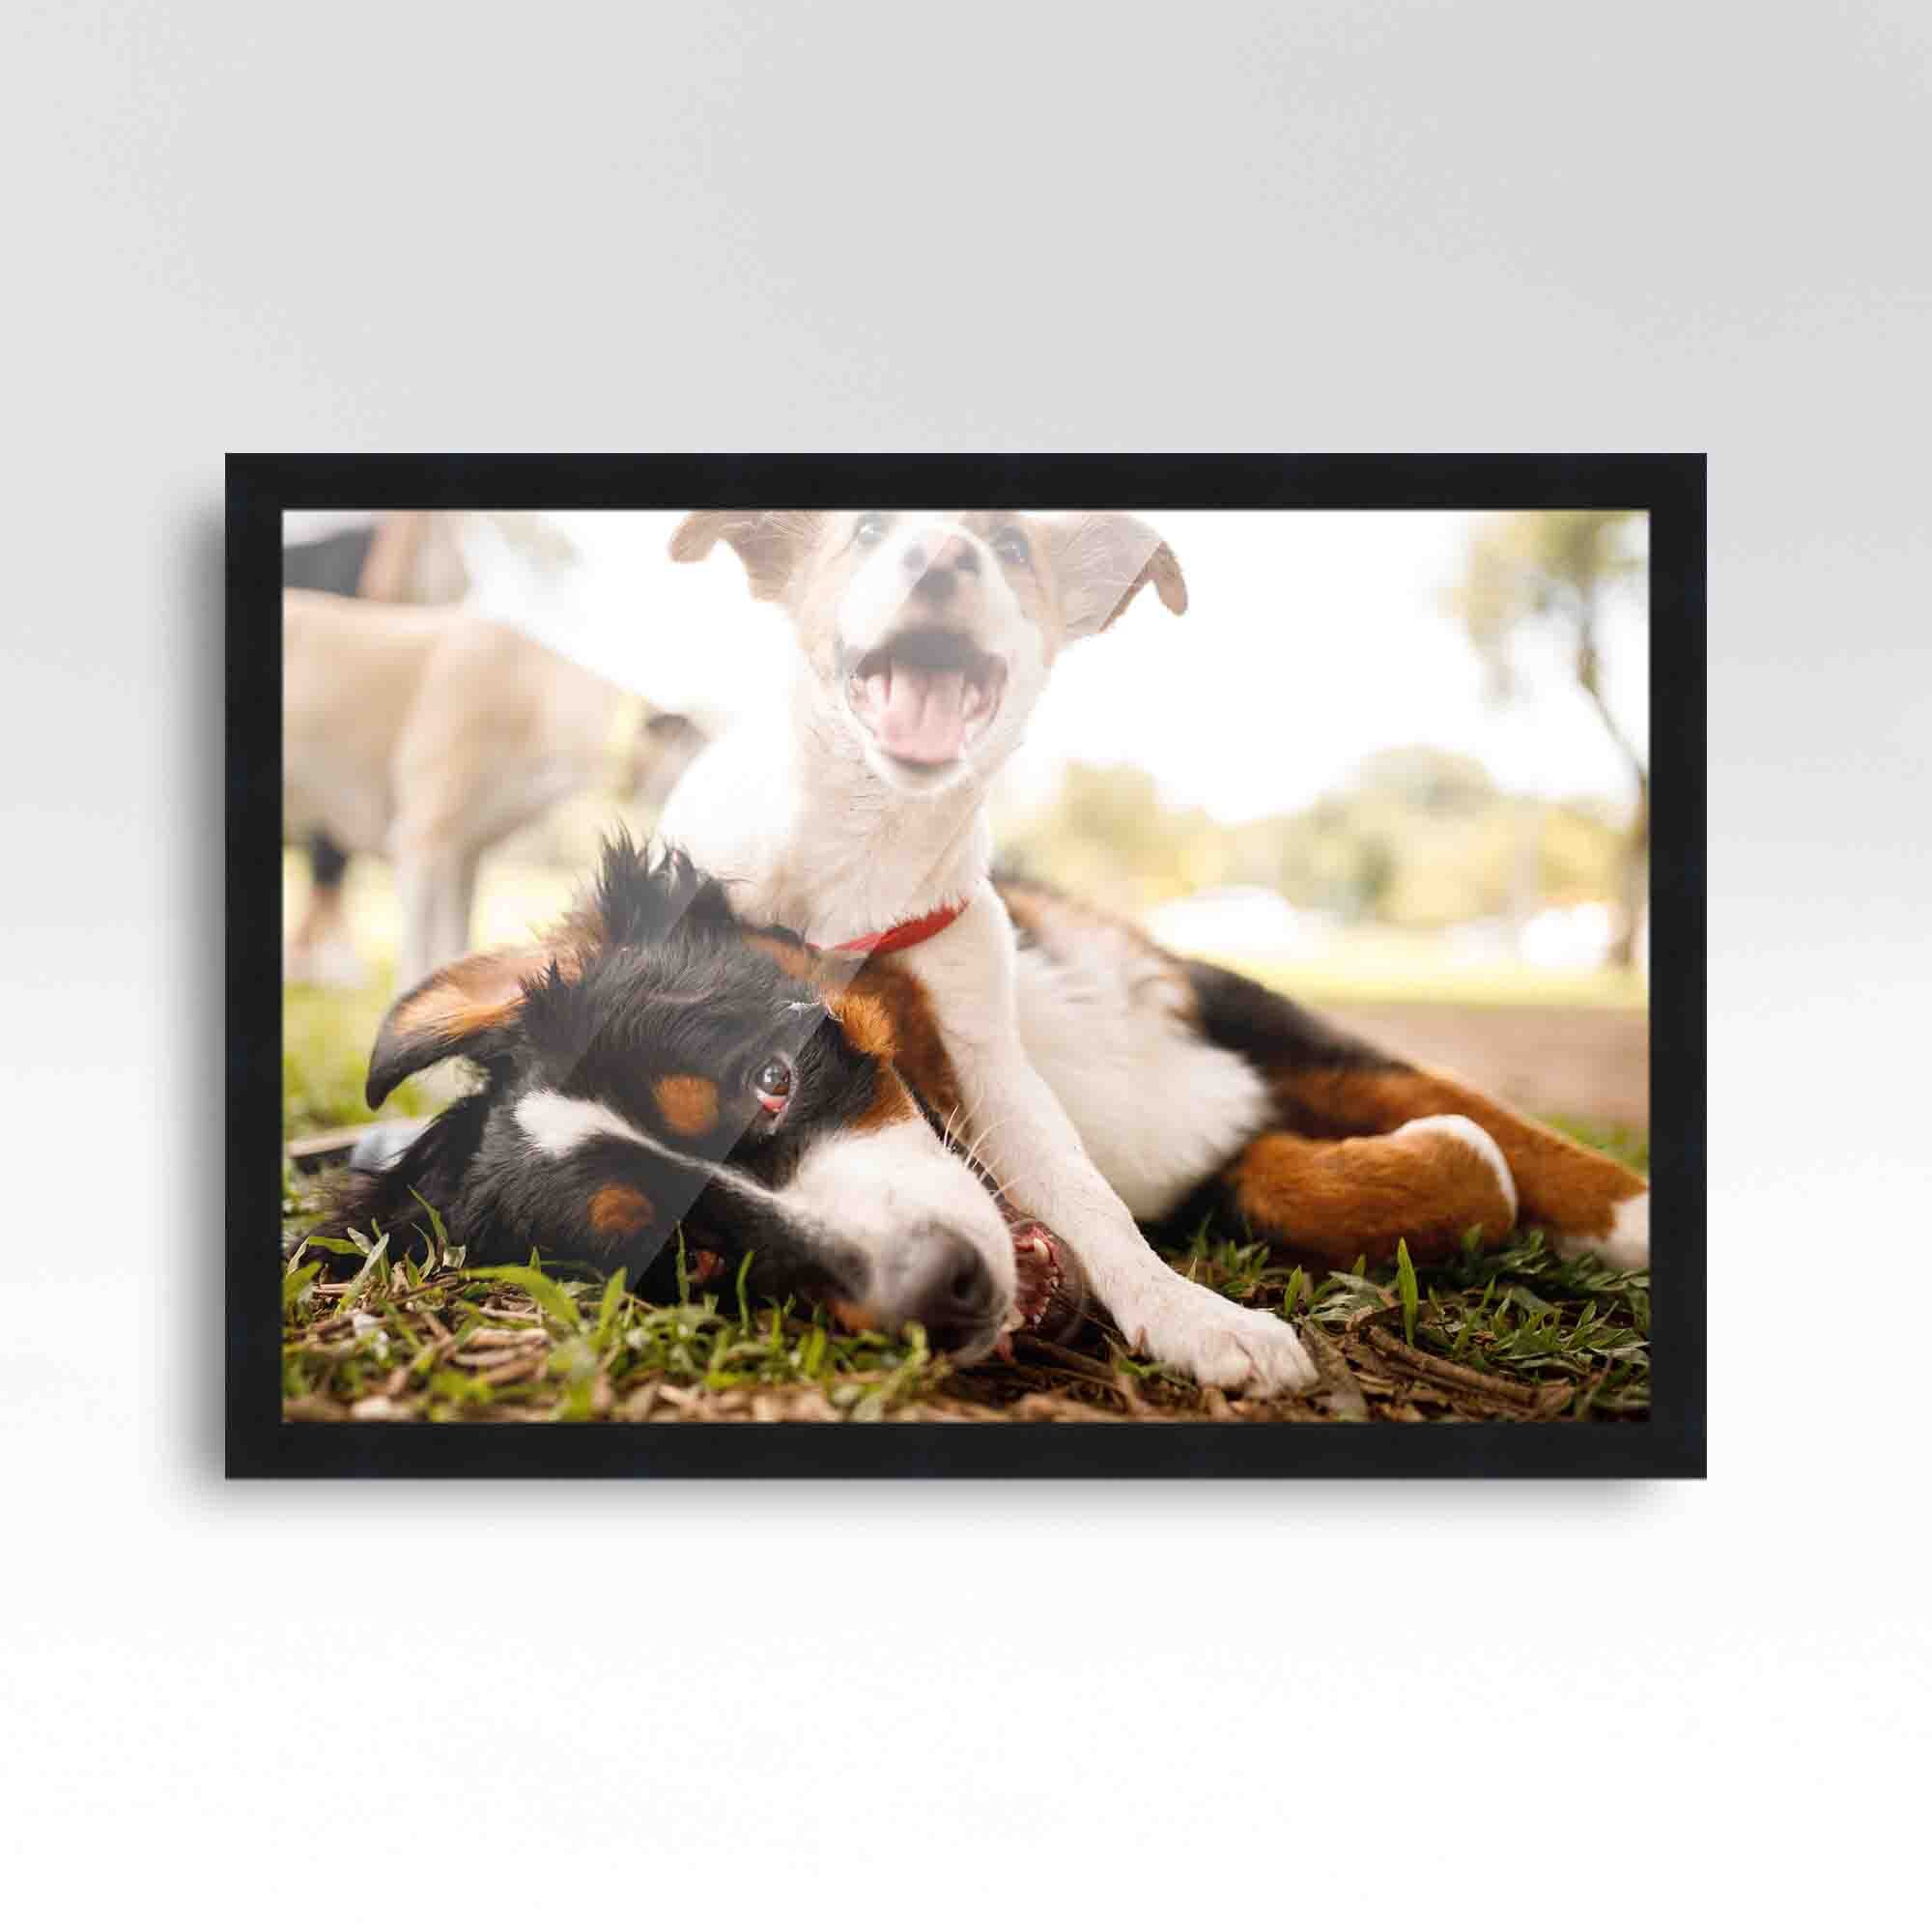 24x30 Frame Beige Real Wood Picture Frame Width 3 inches, Interior Frame  Depth 0.5 inches